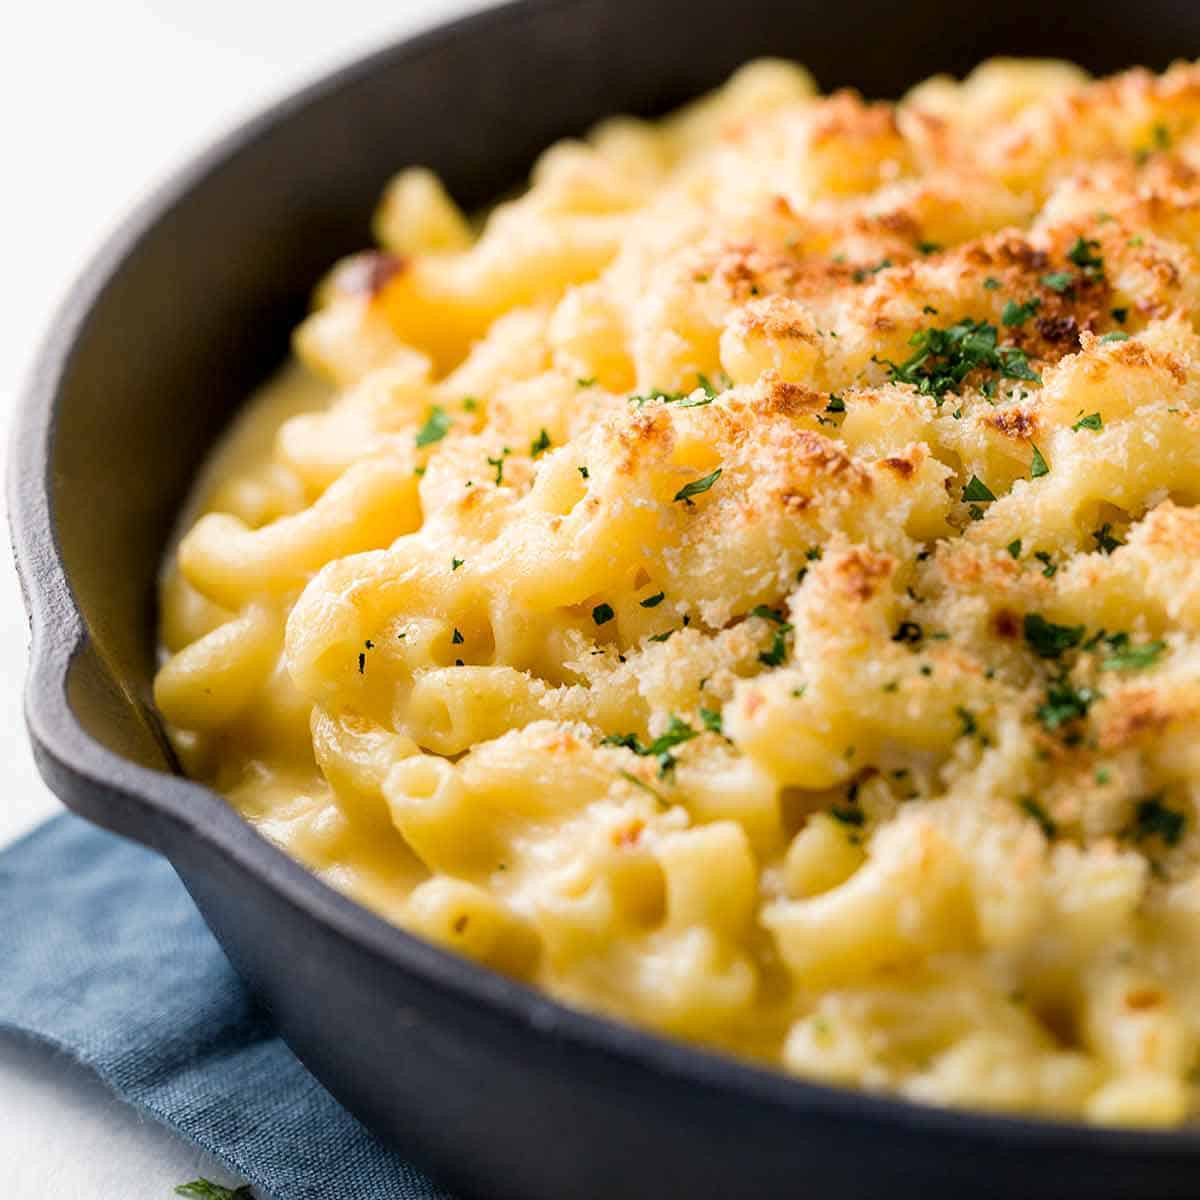 Make Baked Macaroni And Cheese
 Baked Macaroni and Cheese with Bread Crumb Topping